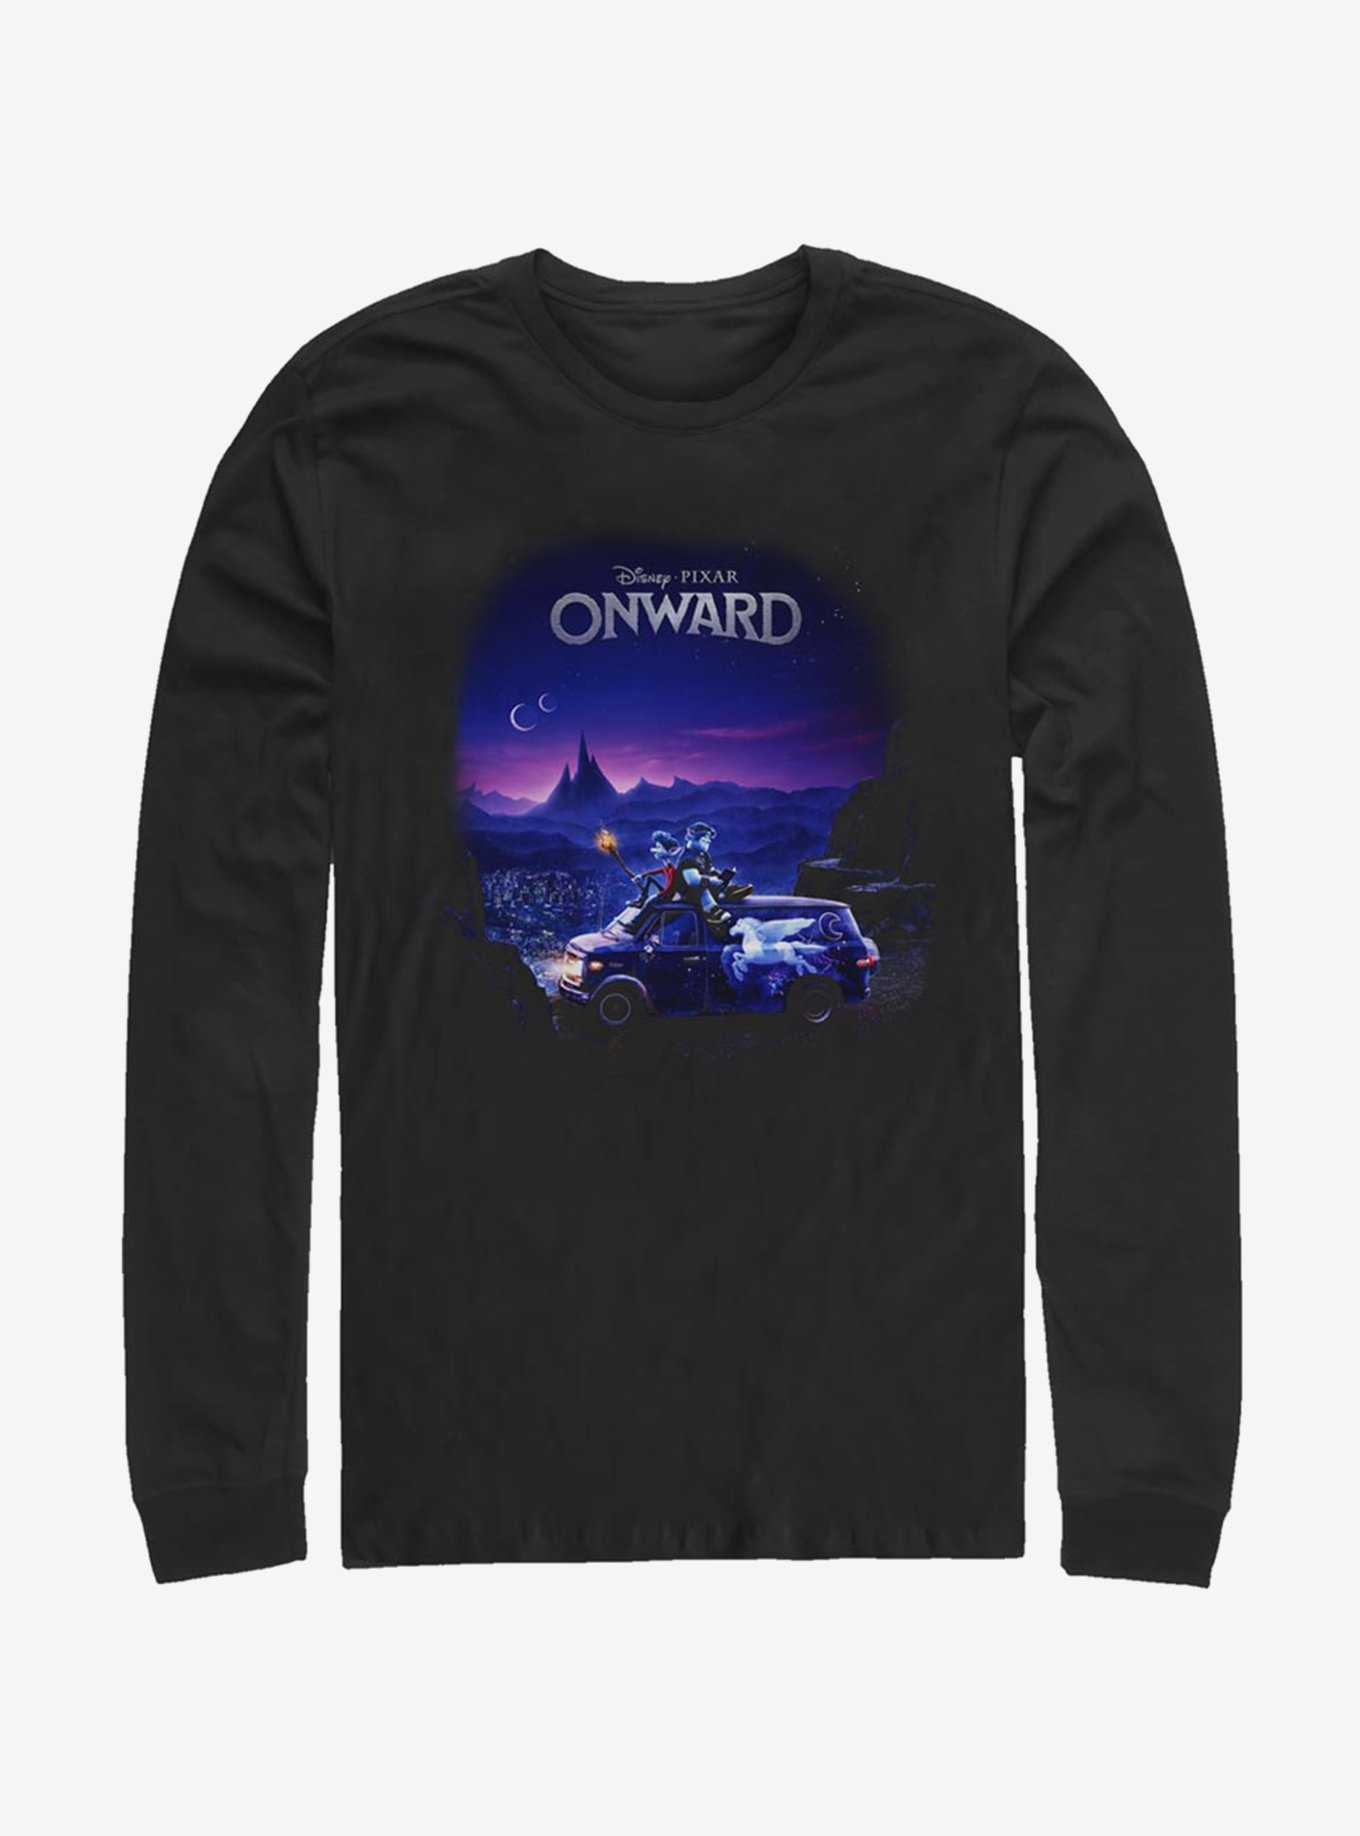 OFFICIAL Onward Movie Merchandise & Hot T-Shirts | Topic